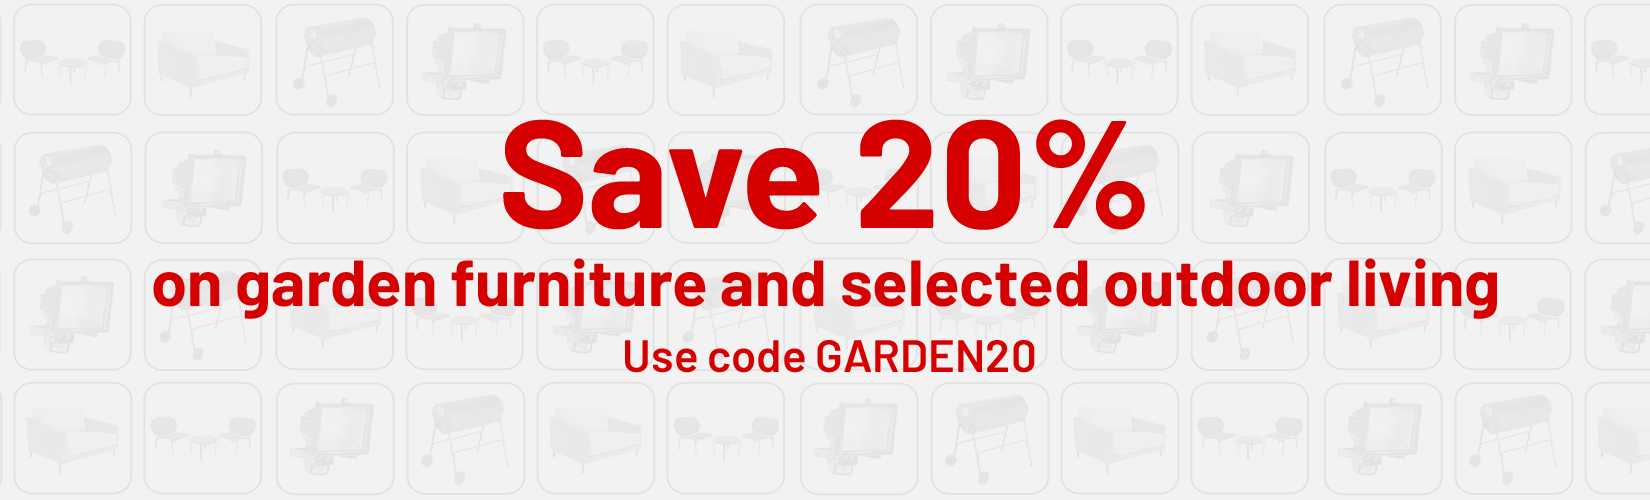 Save 20% on garden furniture and selected outdoor living. Use code GARDEN20.